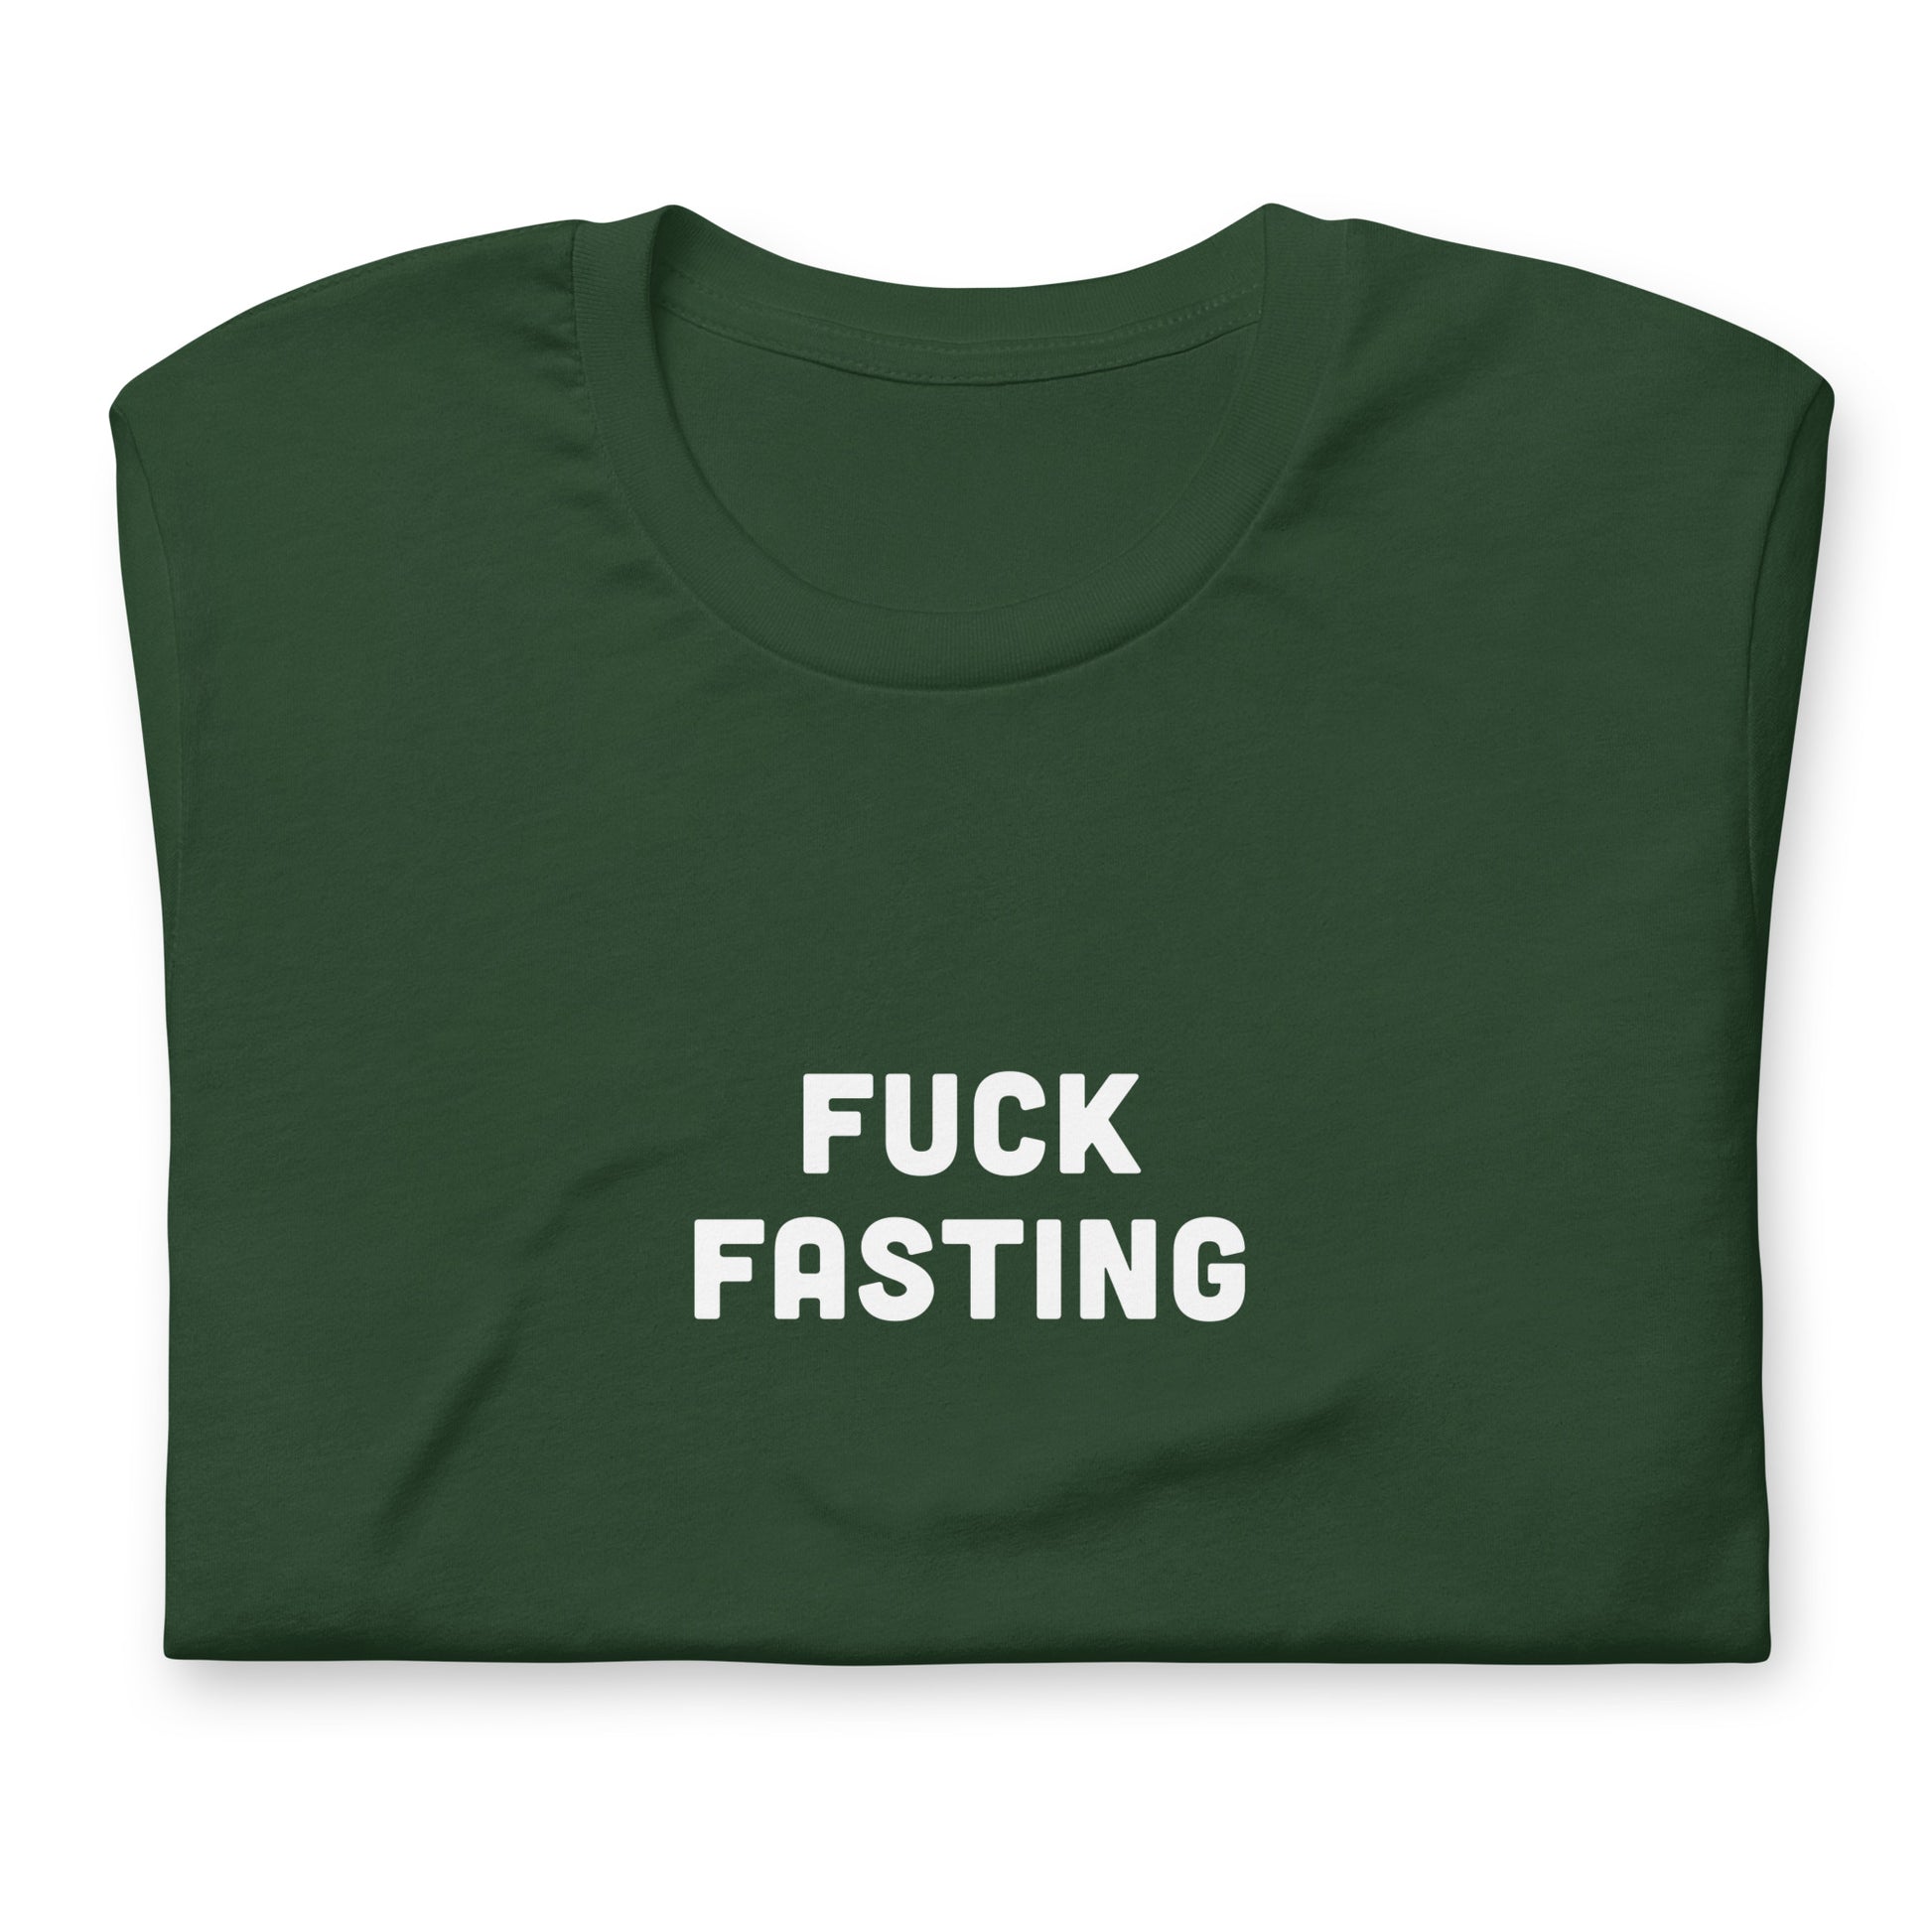 Fuck Fasting T-Shirt Size XL Color Black